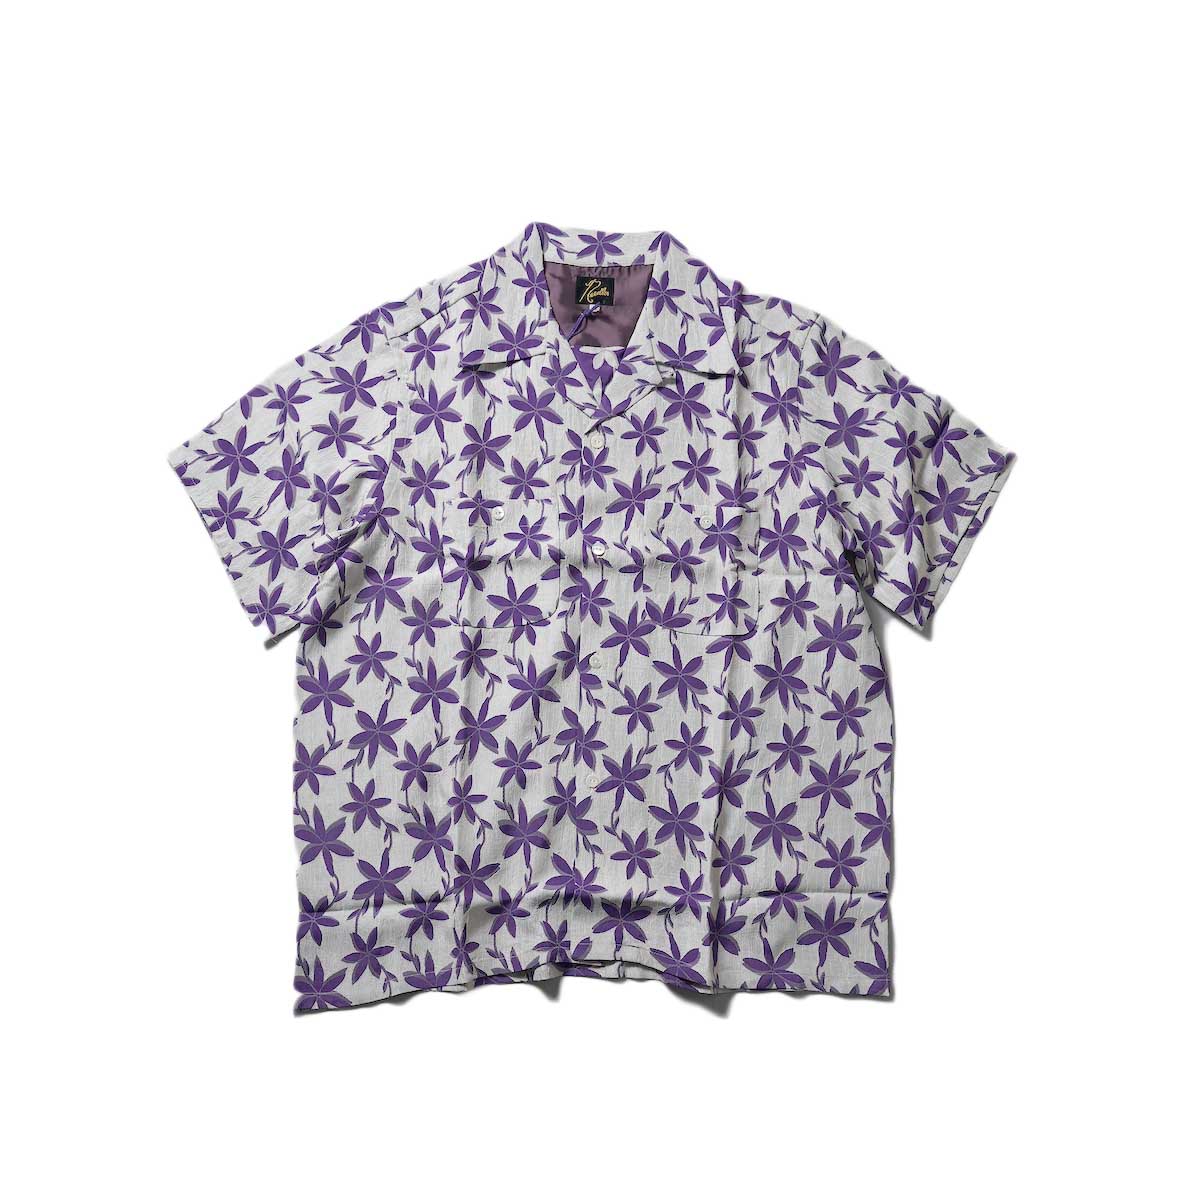 Needles / S/S One-Up Shirt - ACE/R Floral Jq (White)正面